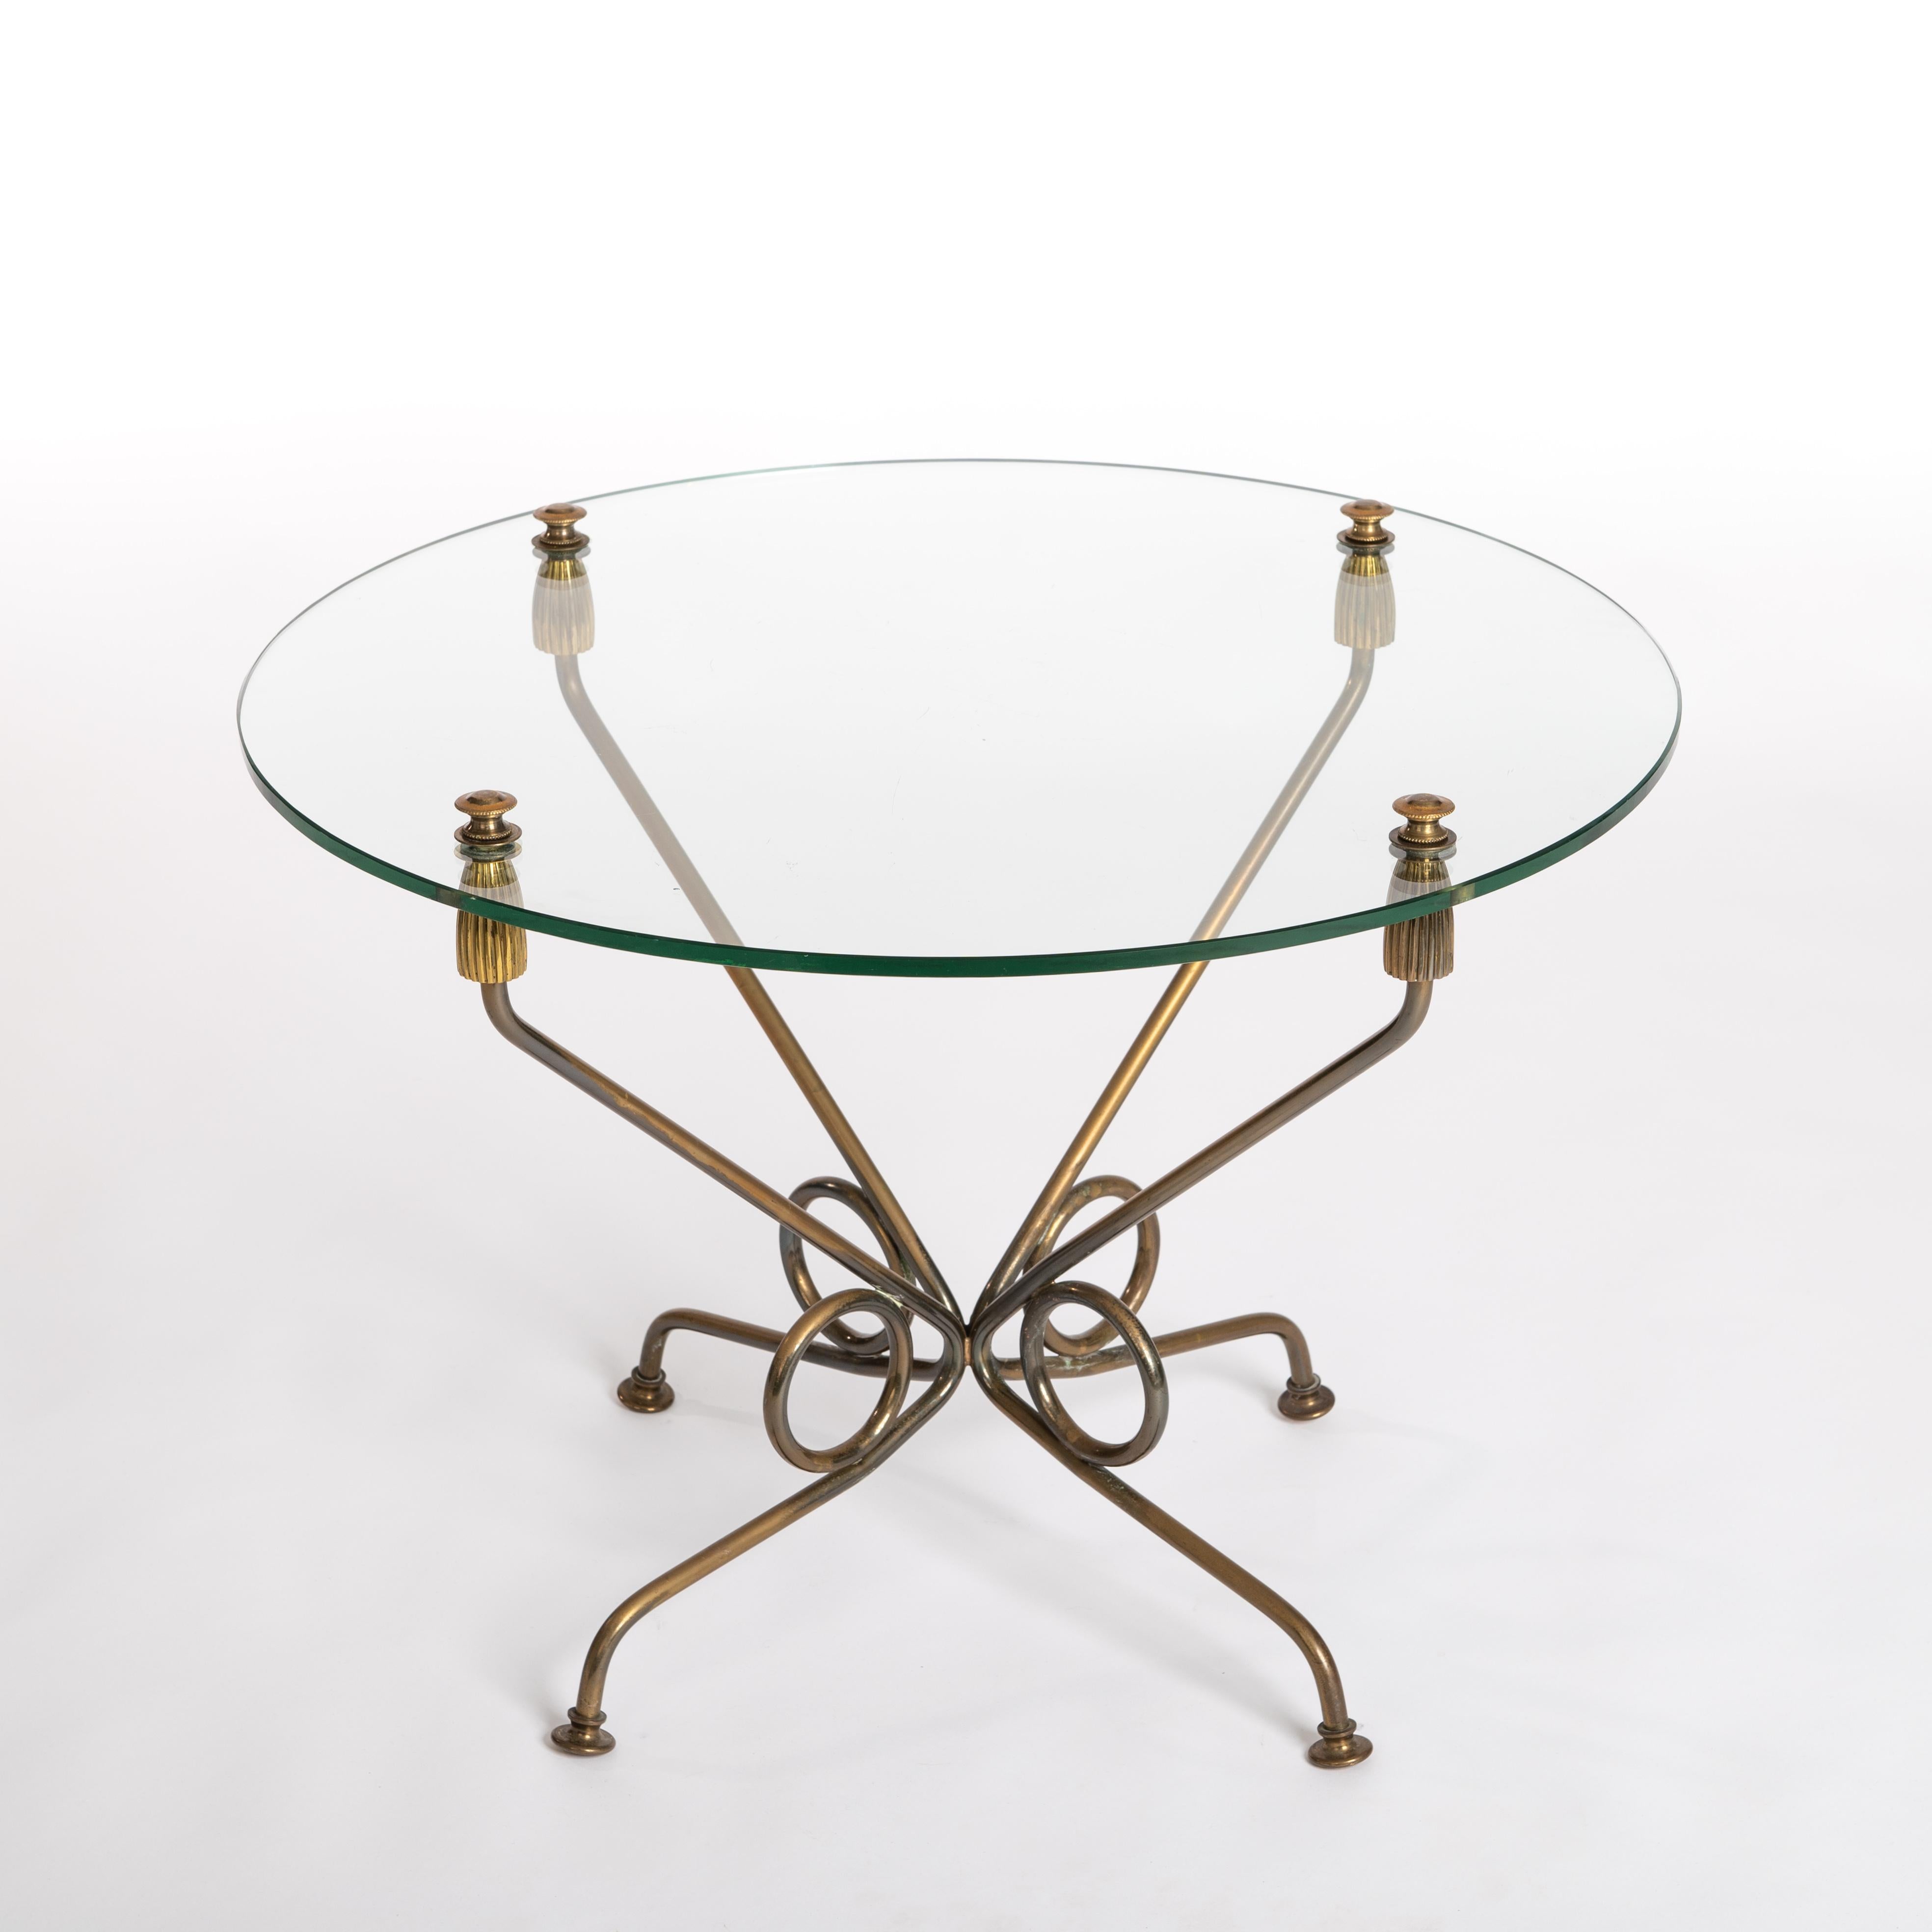 Light-footed, Italian side table Gueridonin brass plated iron.
The base was forged from iron and then brass plated.
In the lower part of the rings, the brass layer is already slightly worn and there is an interesting anthracite-gold patina. The